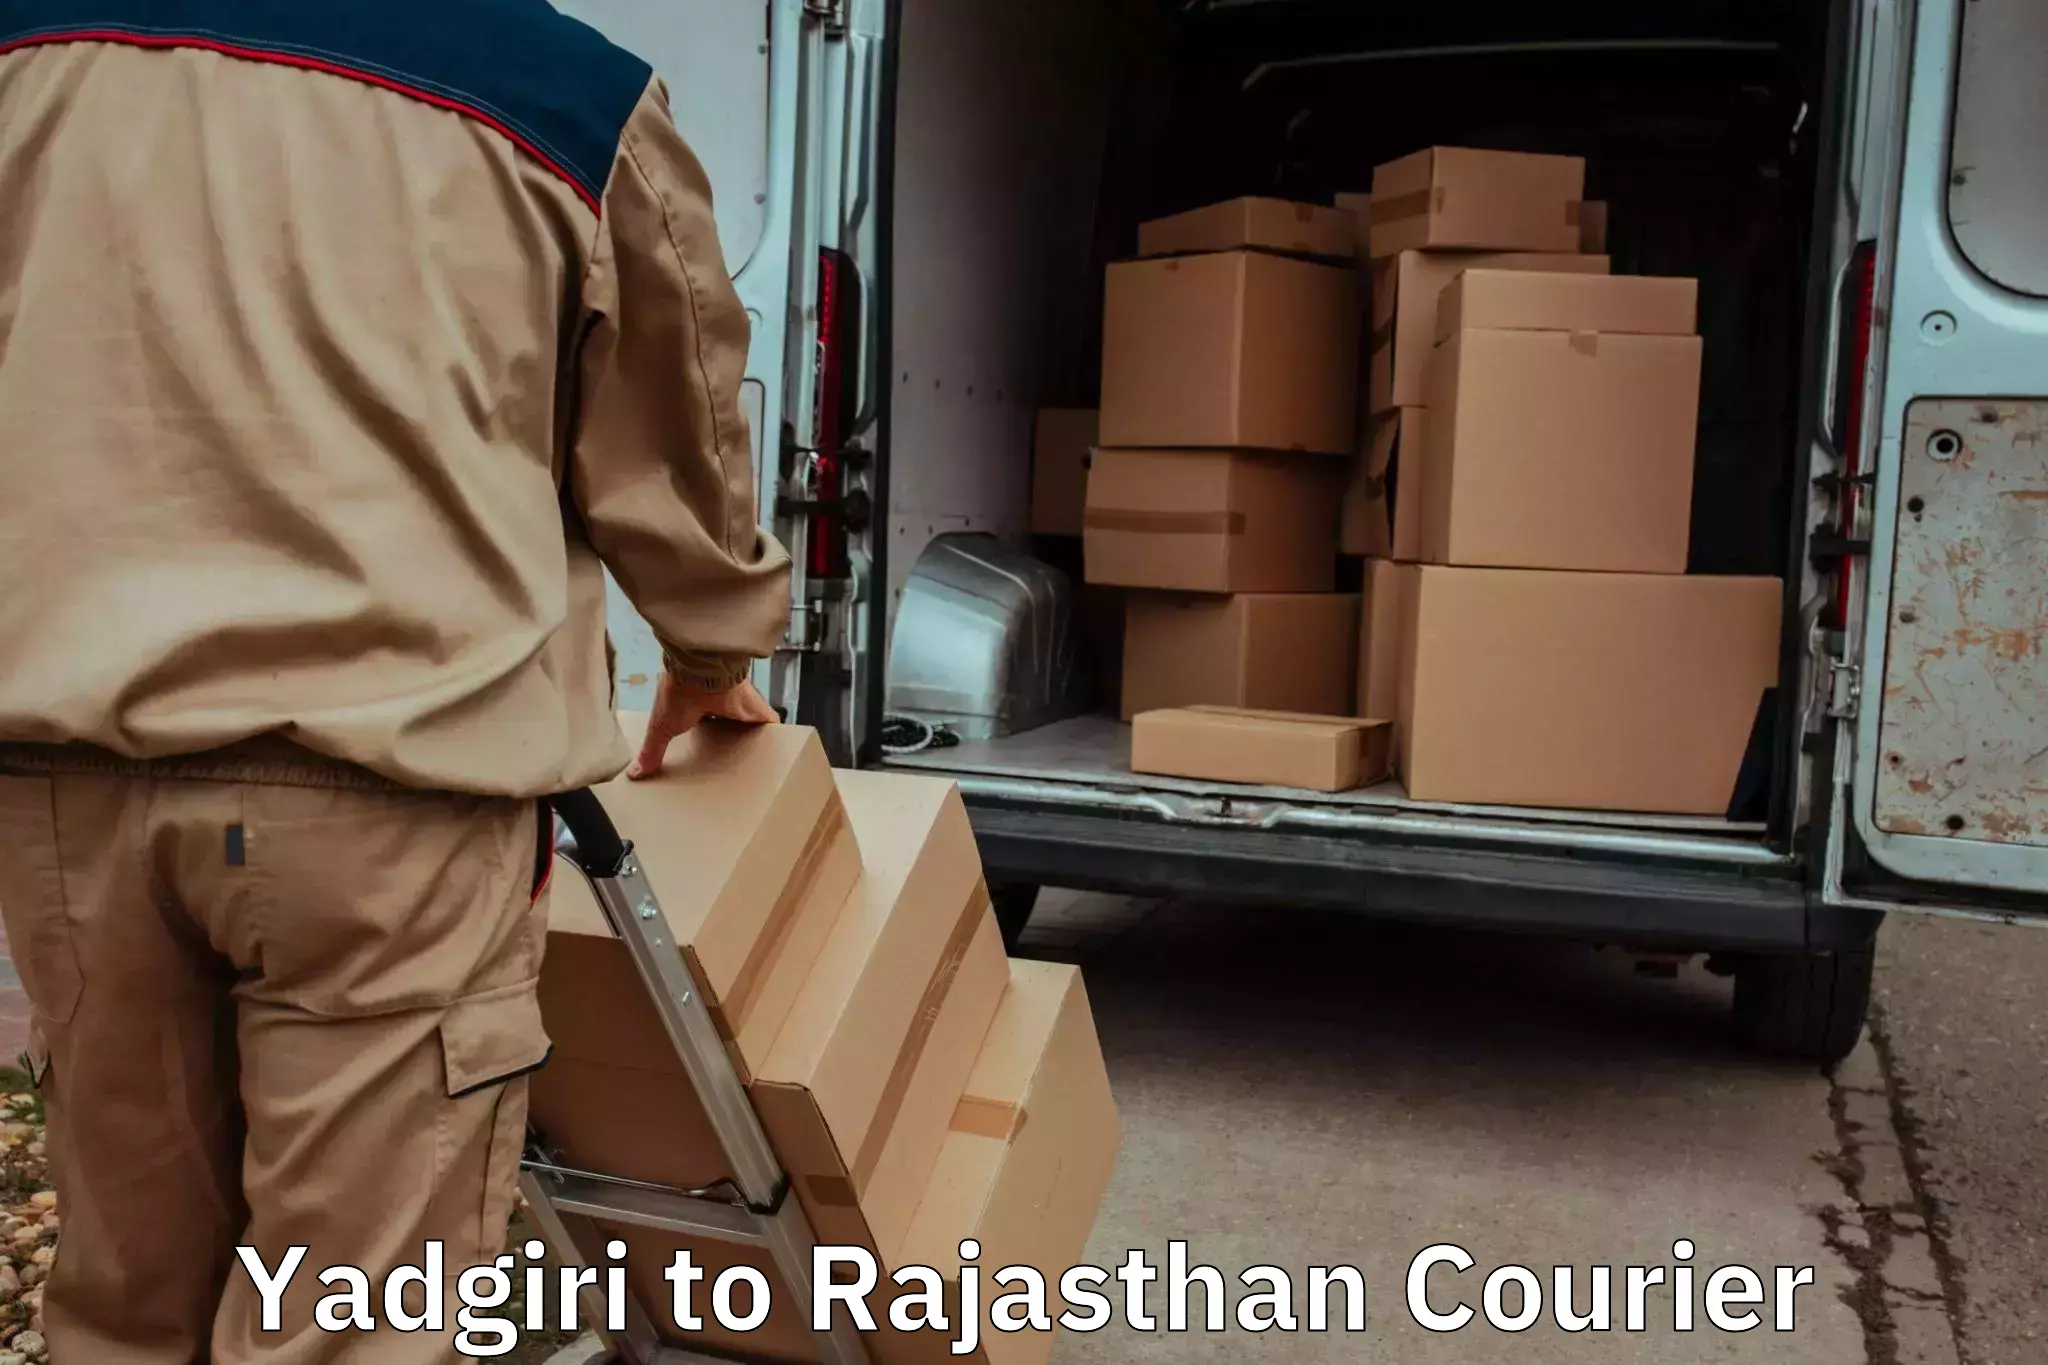 Professional moving company Yadgiri to Piparcity